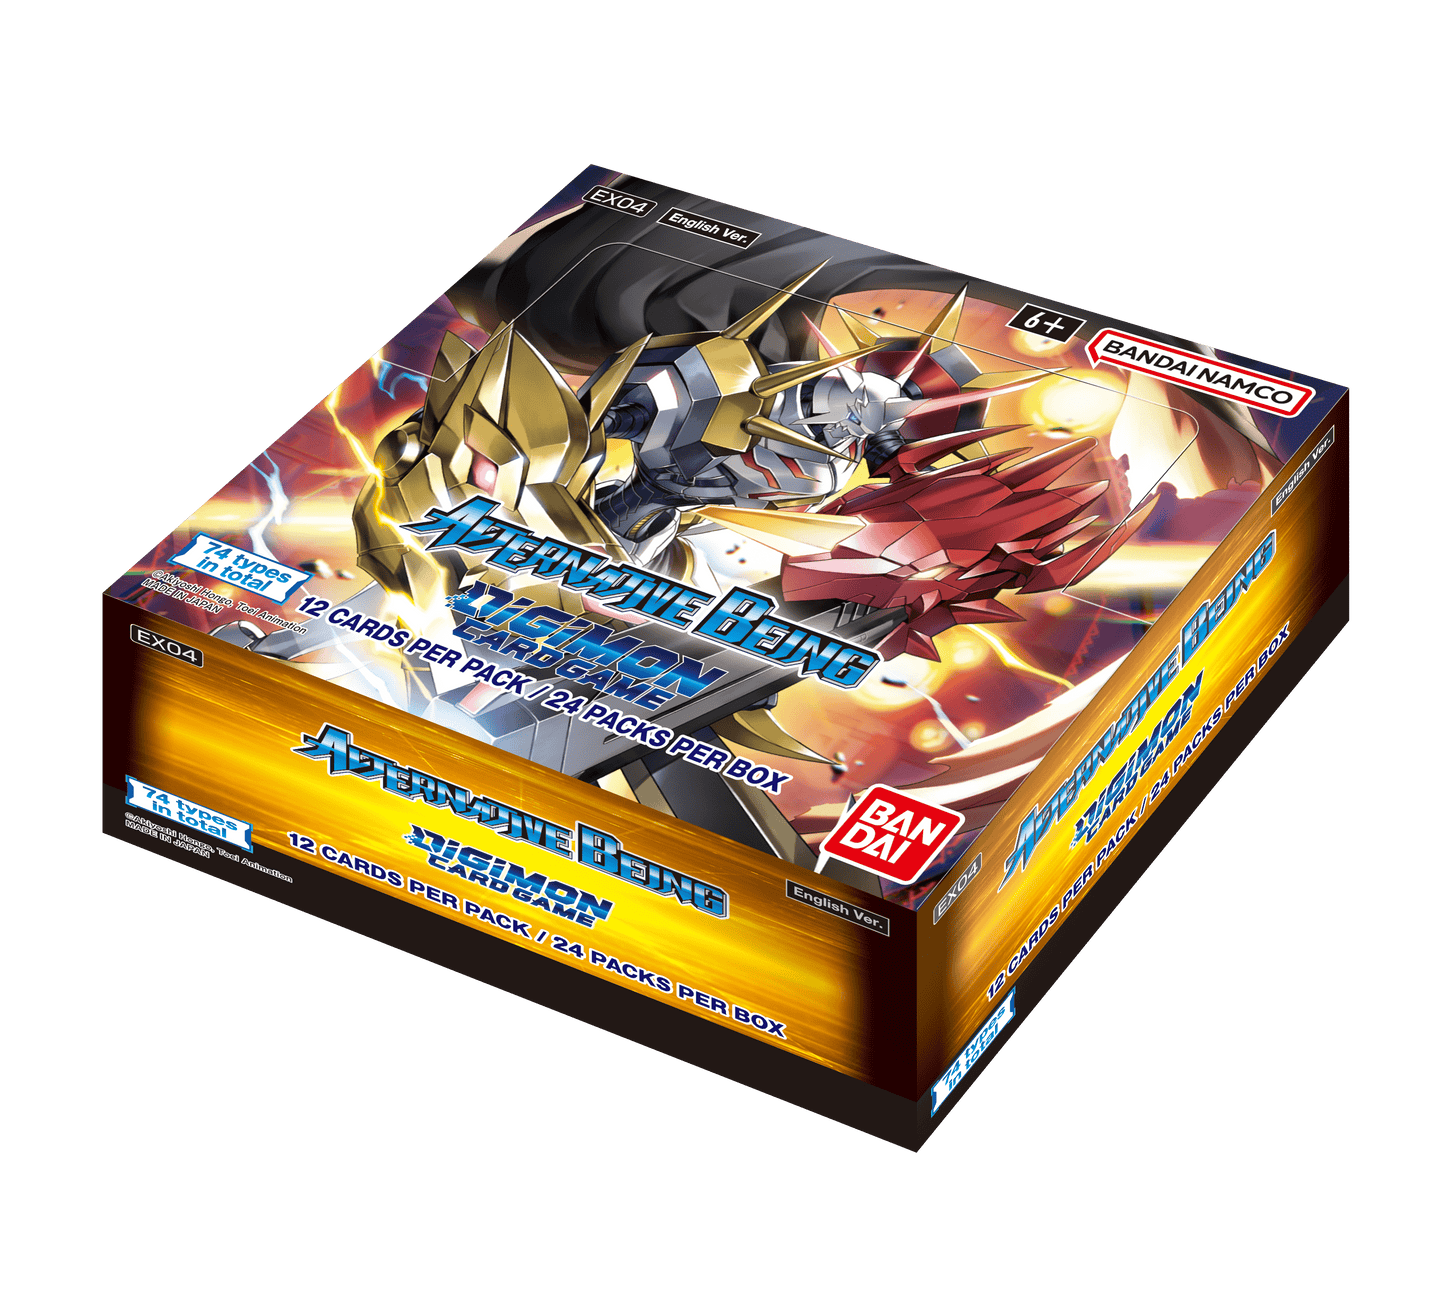 Digimon Card Game Alternative Being [EX-04] Booster Box